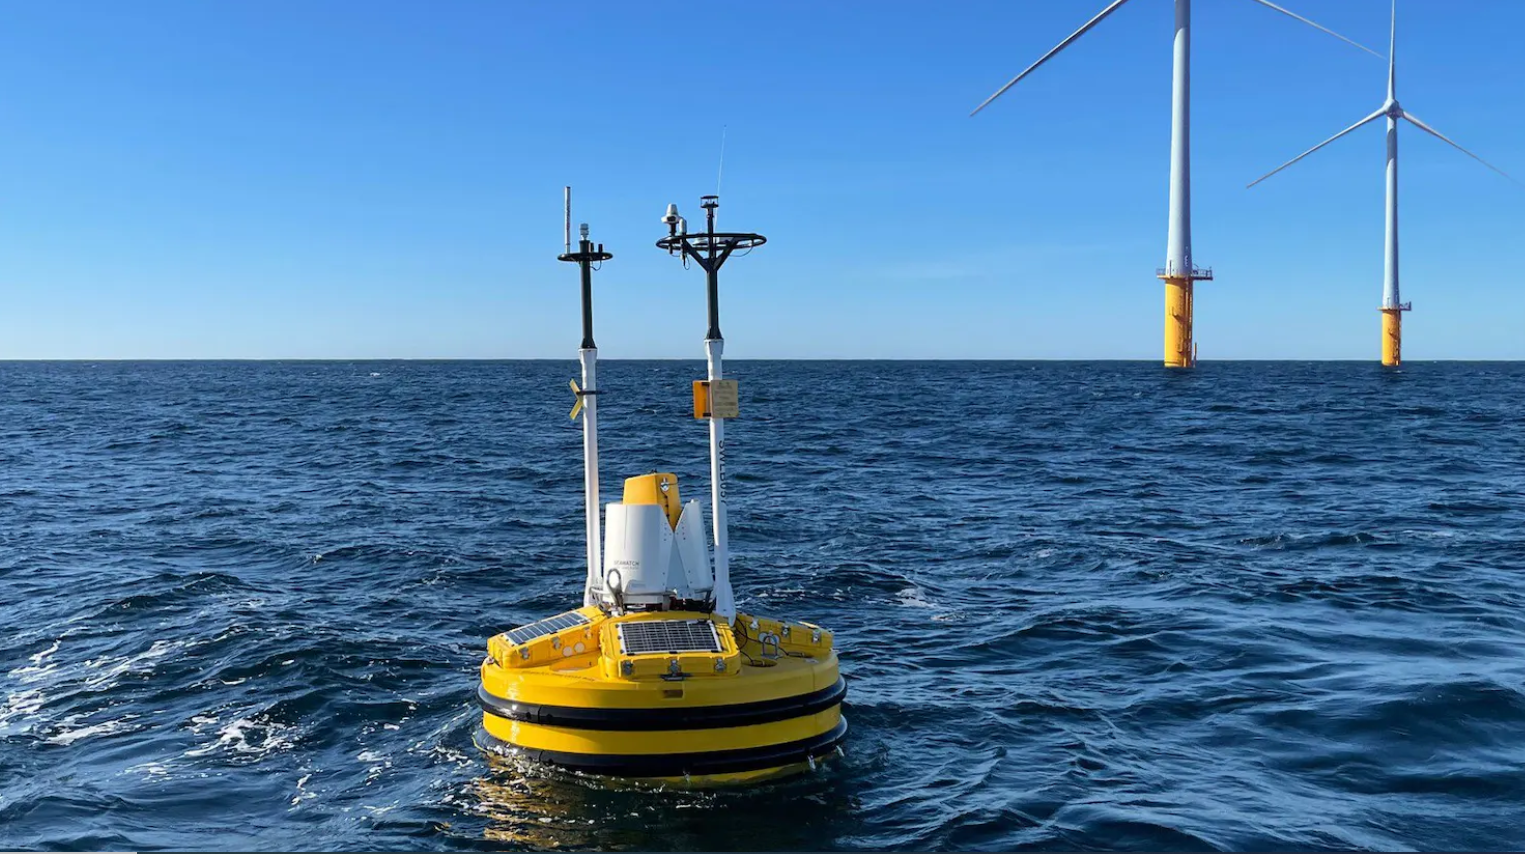 Energinet has awarded Fugro a new contract to provide floating wind lidar measurements for five offshore wind projects in Denmark